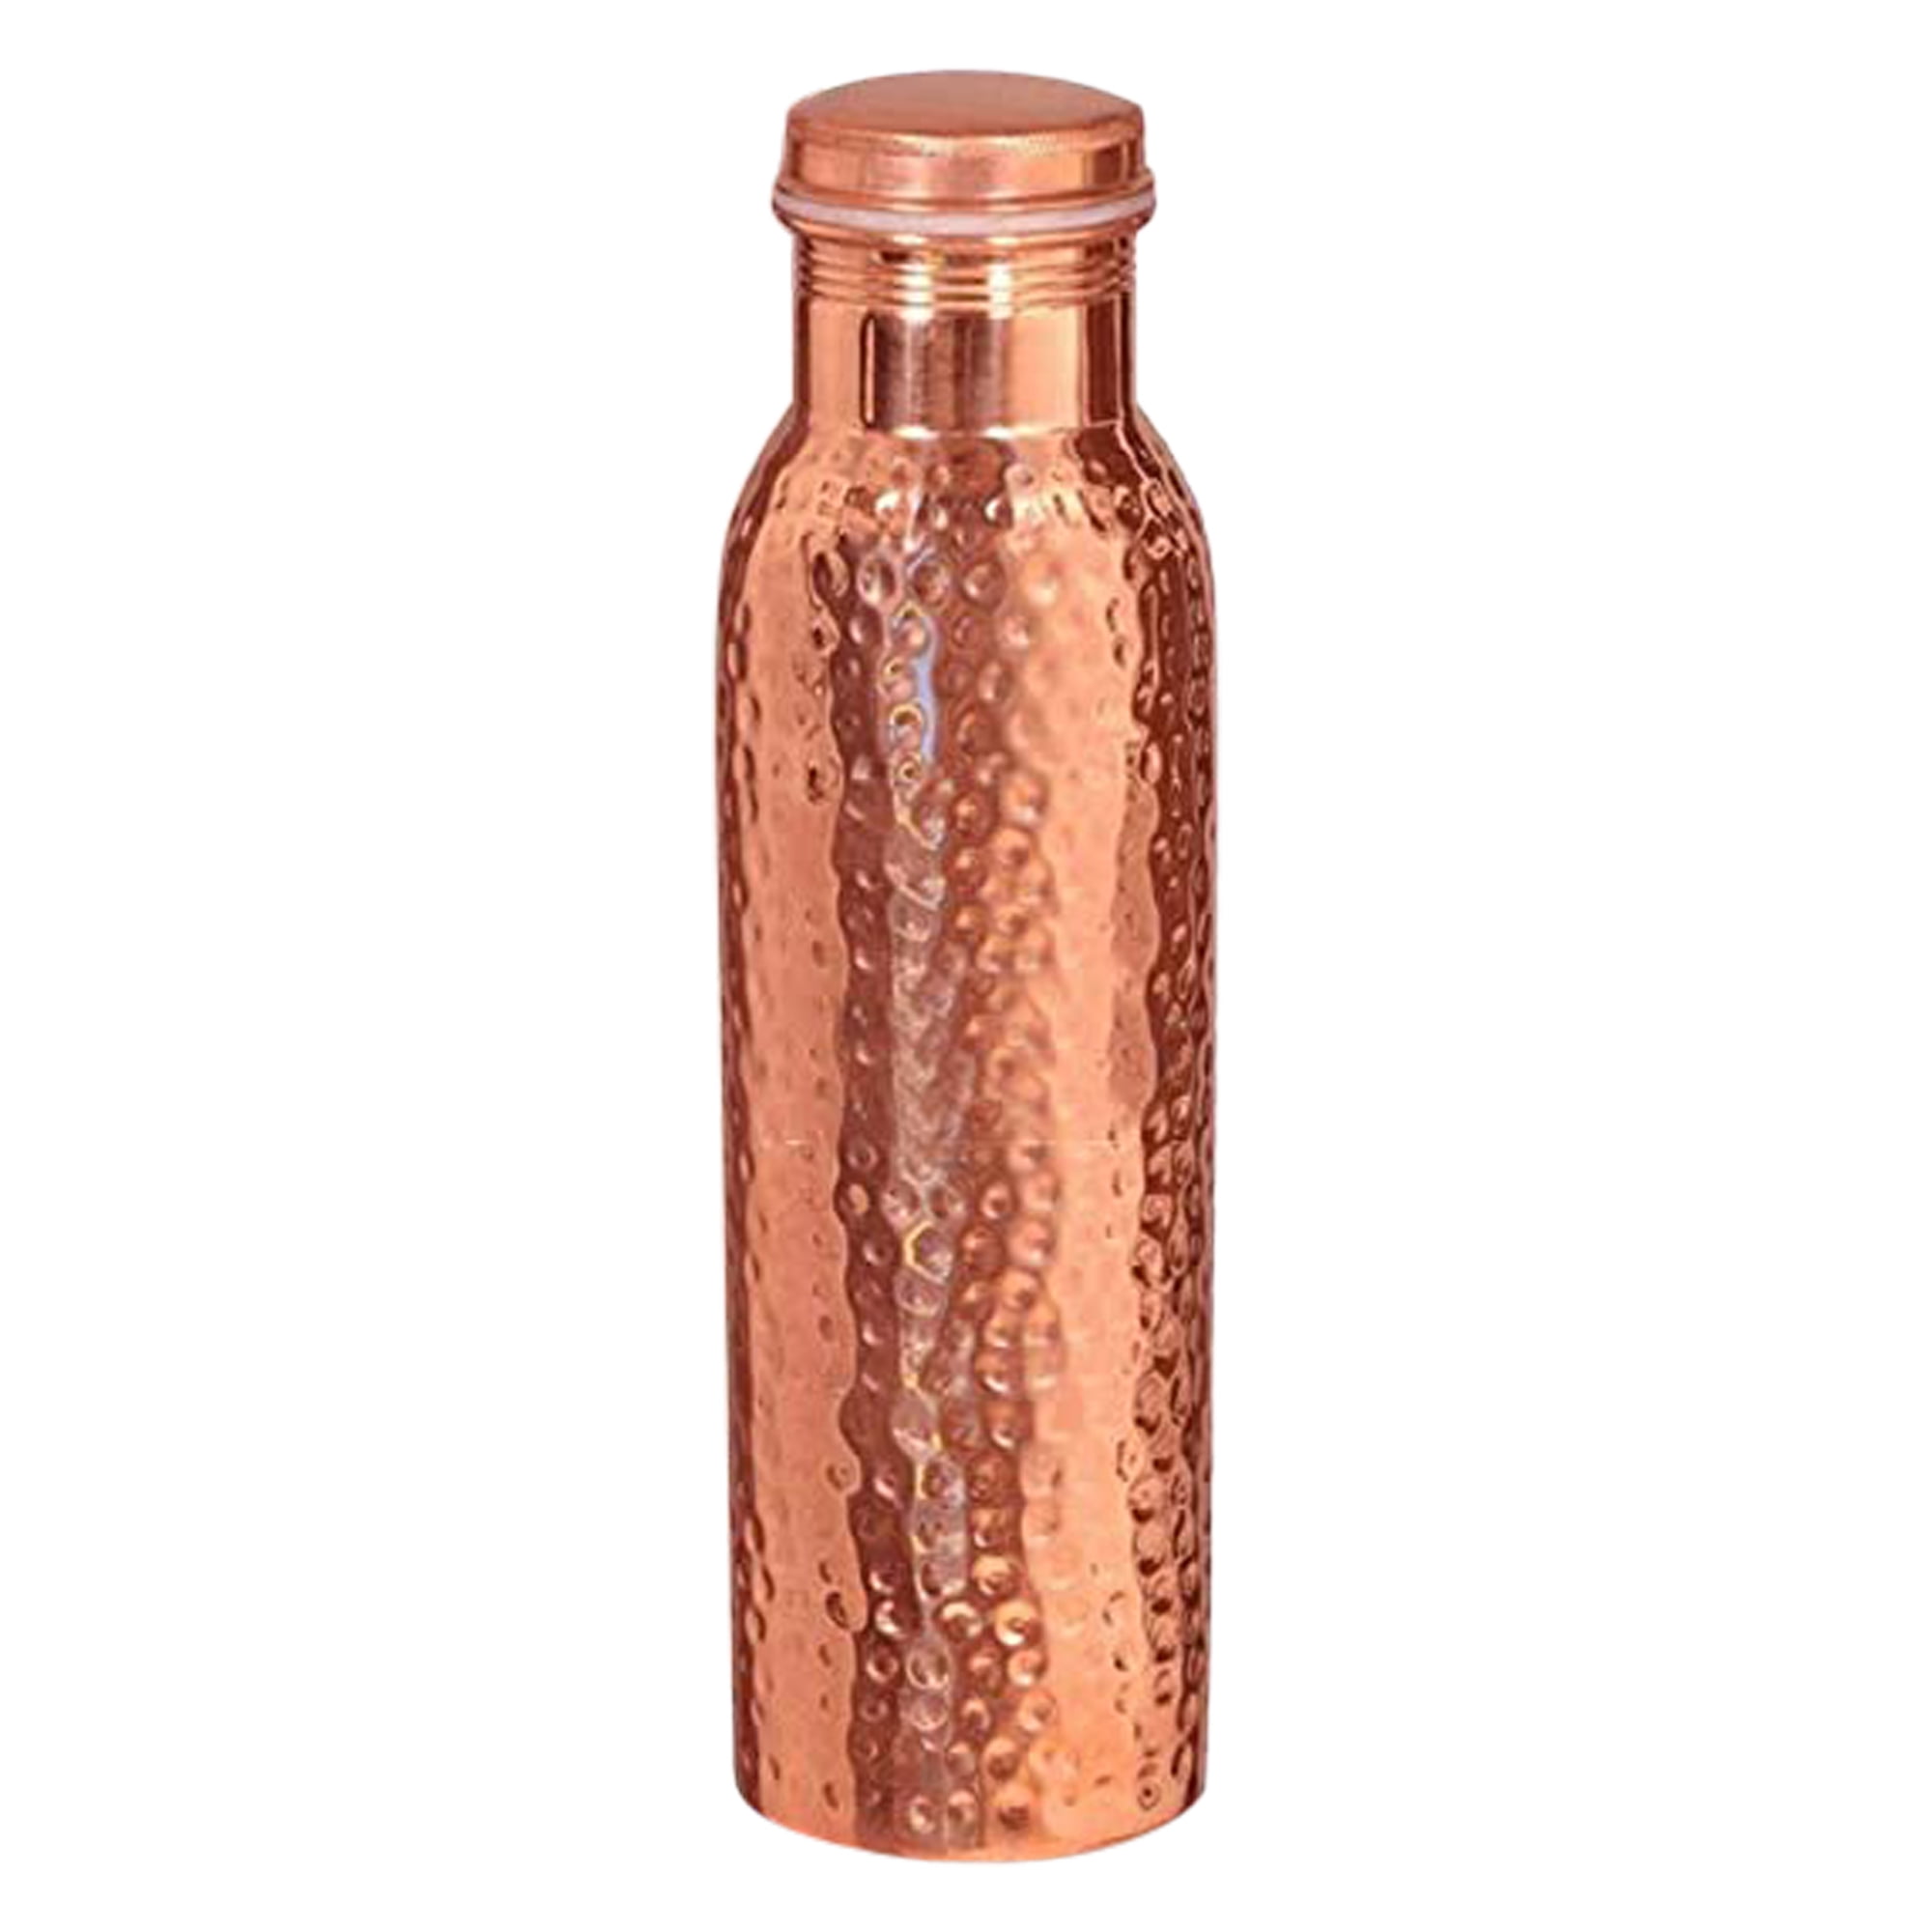 100% Pure Copper Hammered Water Bottle 950 Ml For Yoga Ayurveda Health Benefits 